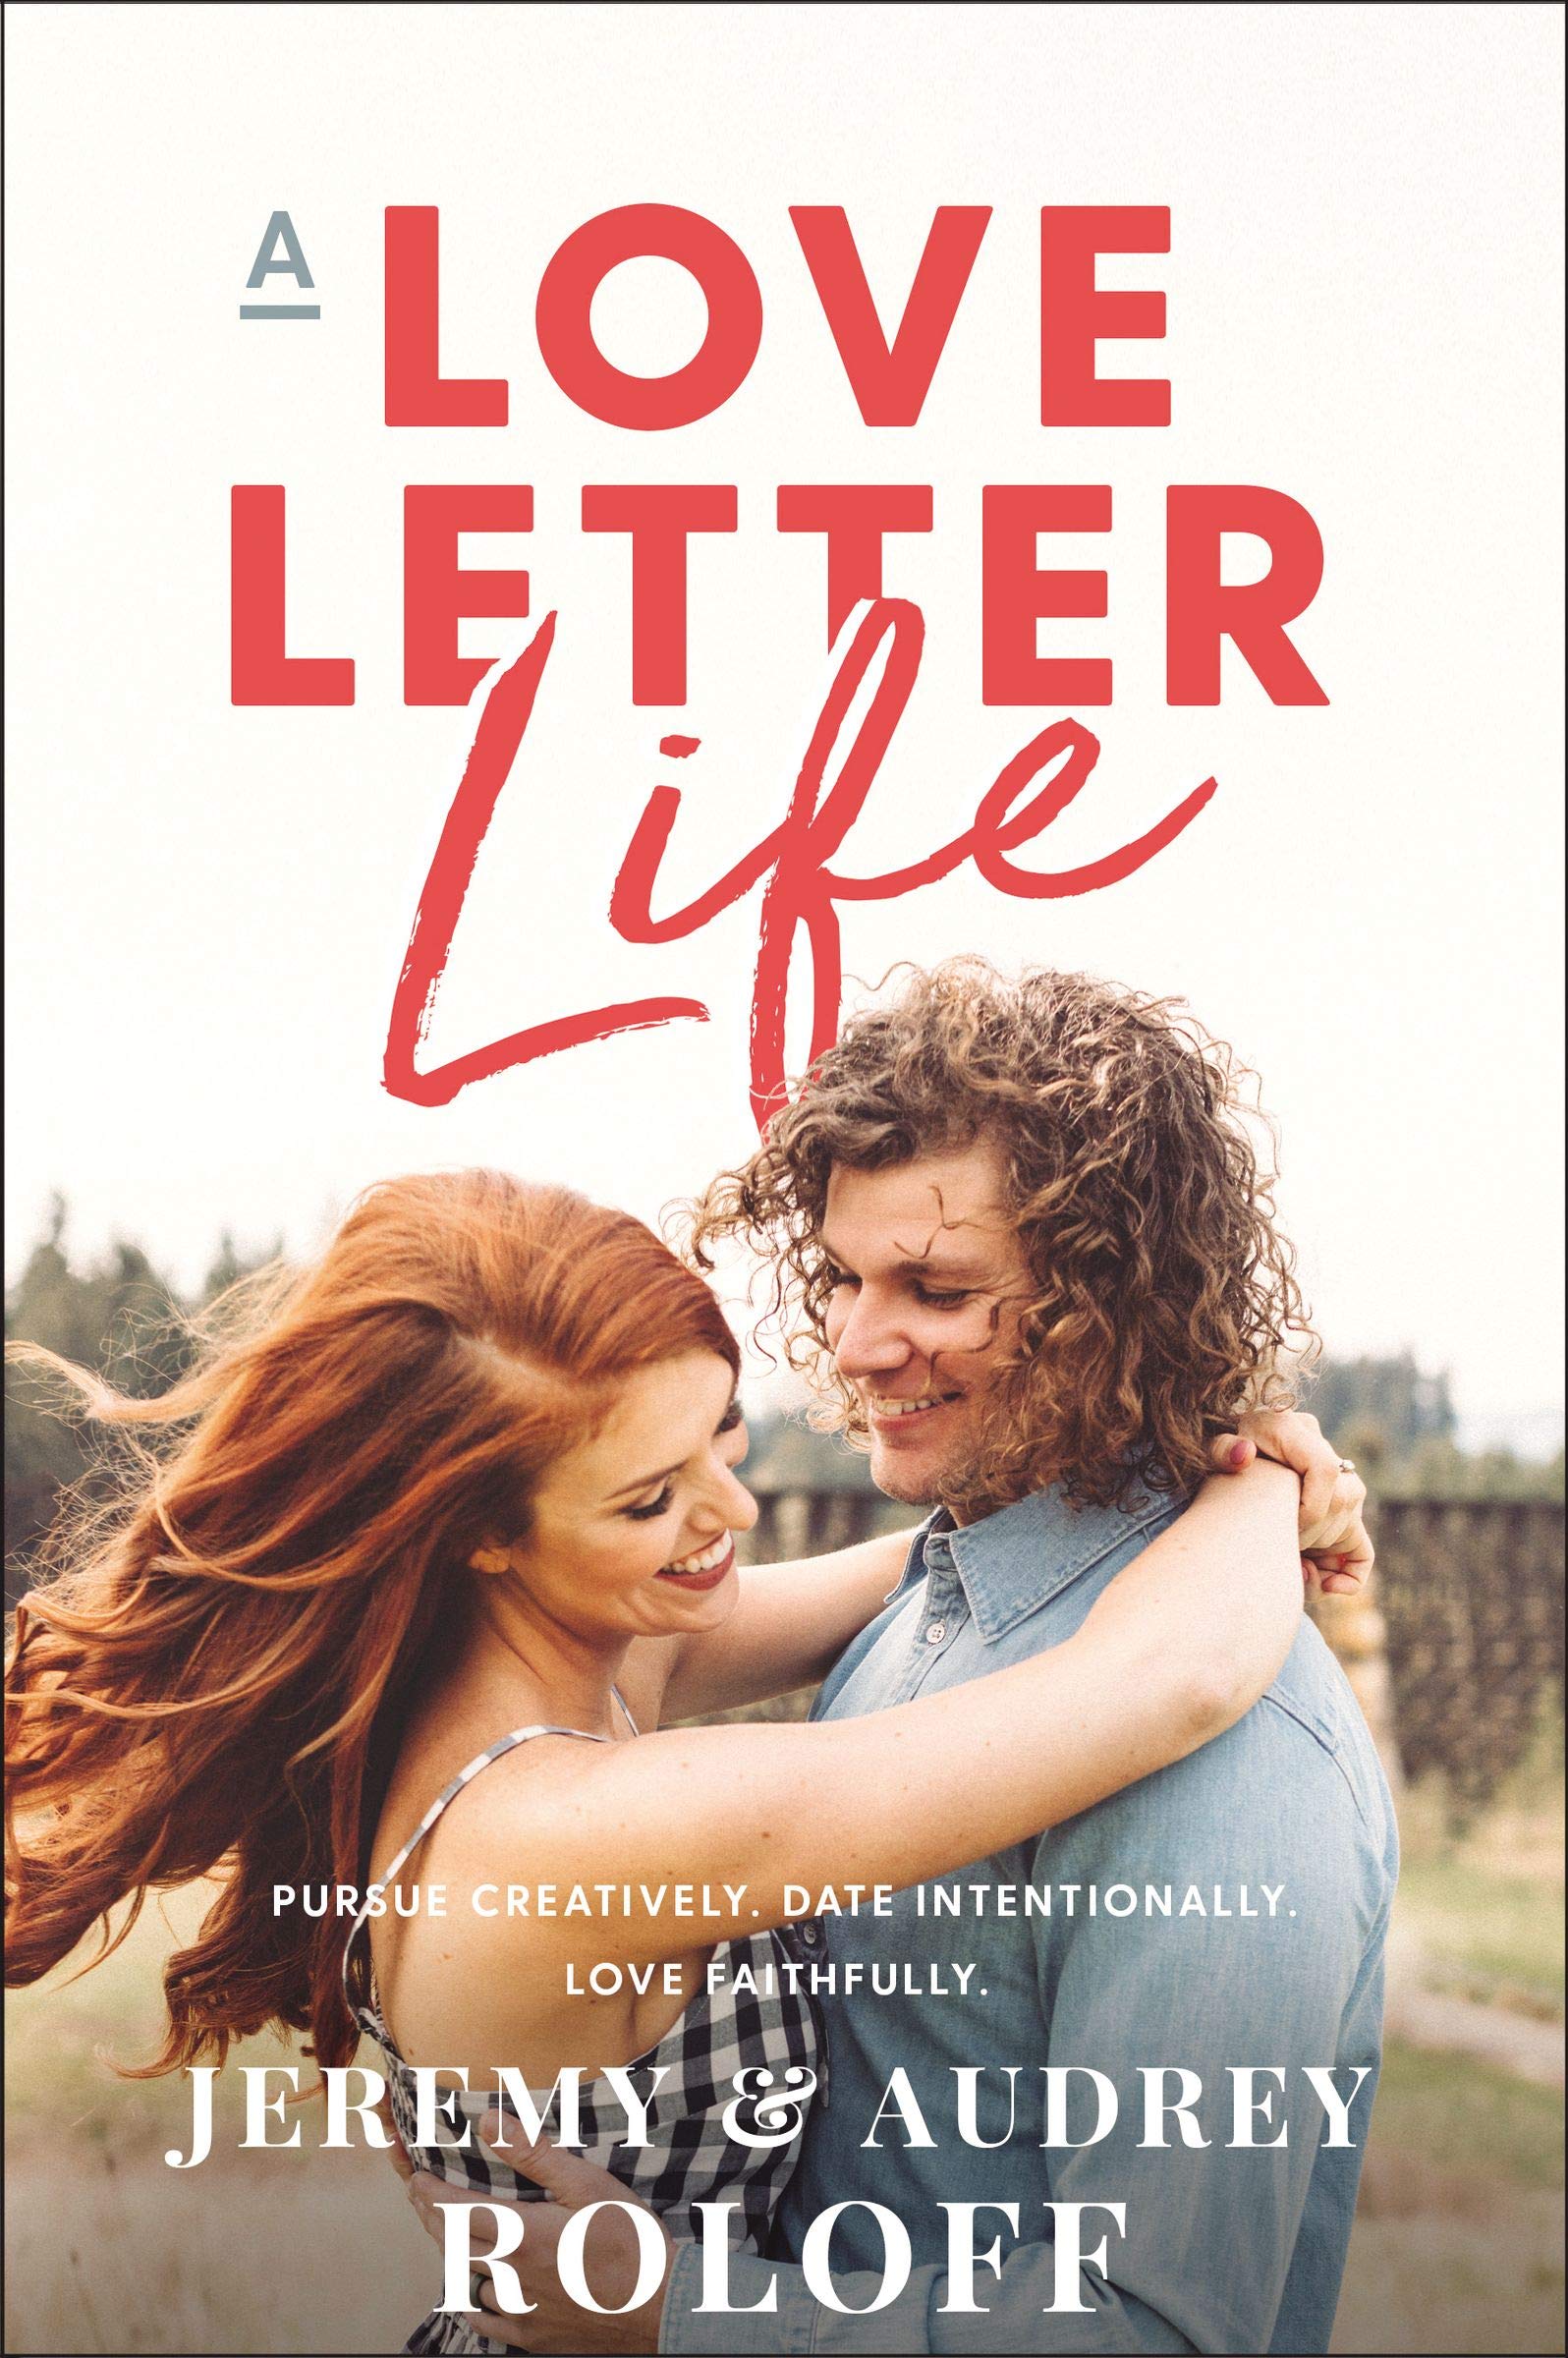 A Love Letter Life: Pursue Creatively, Date Intentionally, Love Faithfully